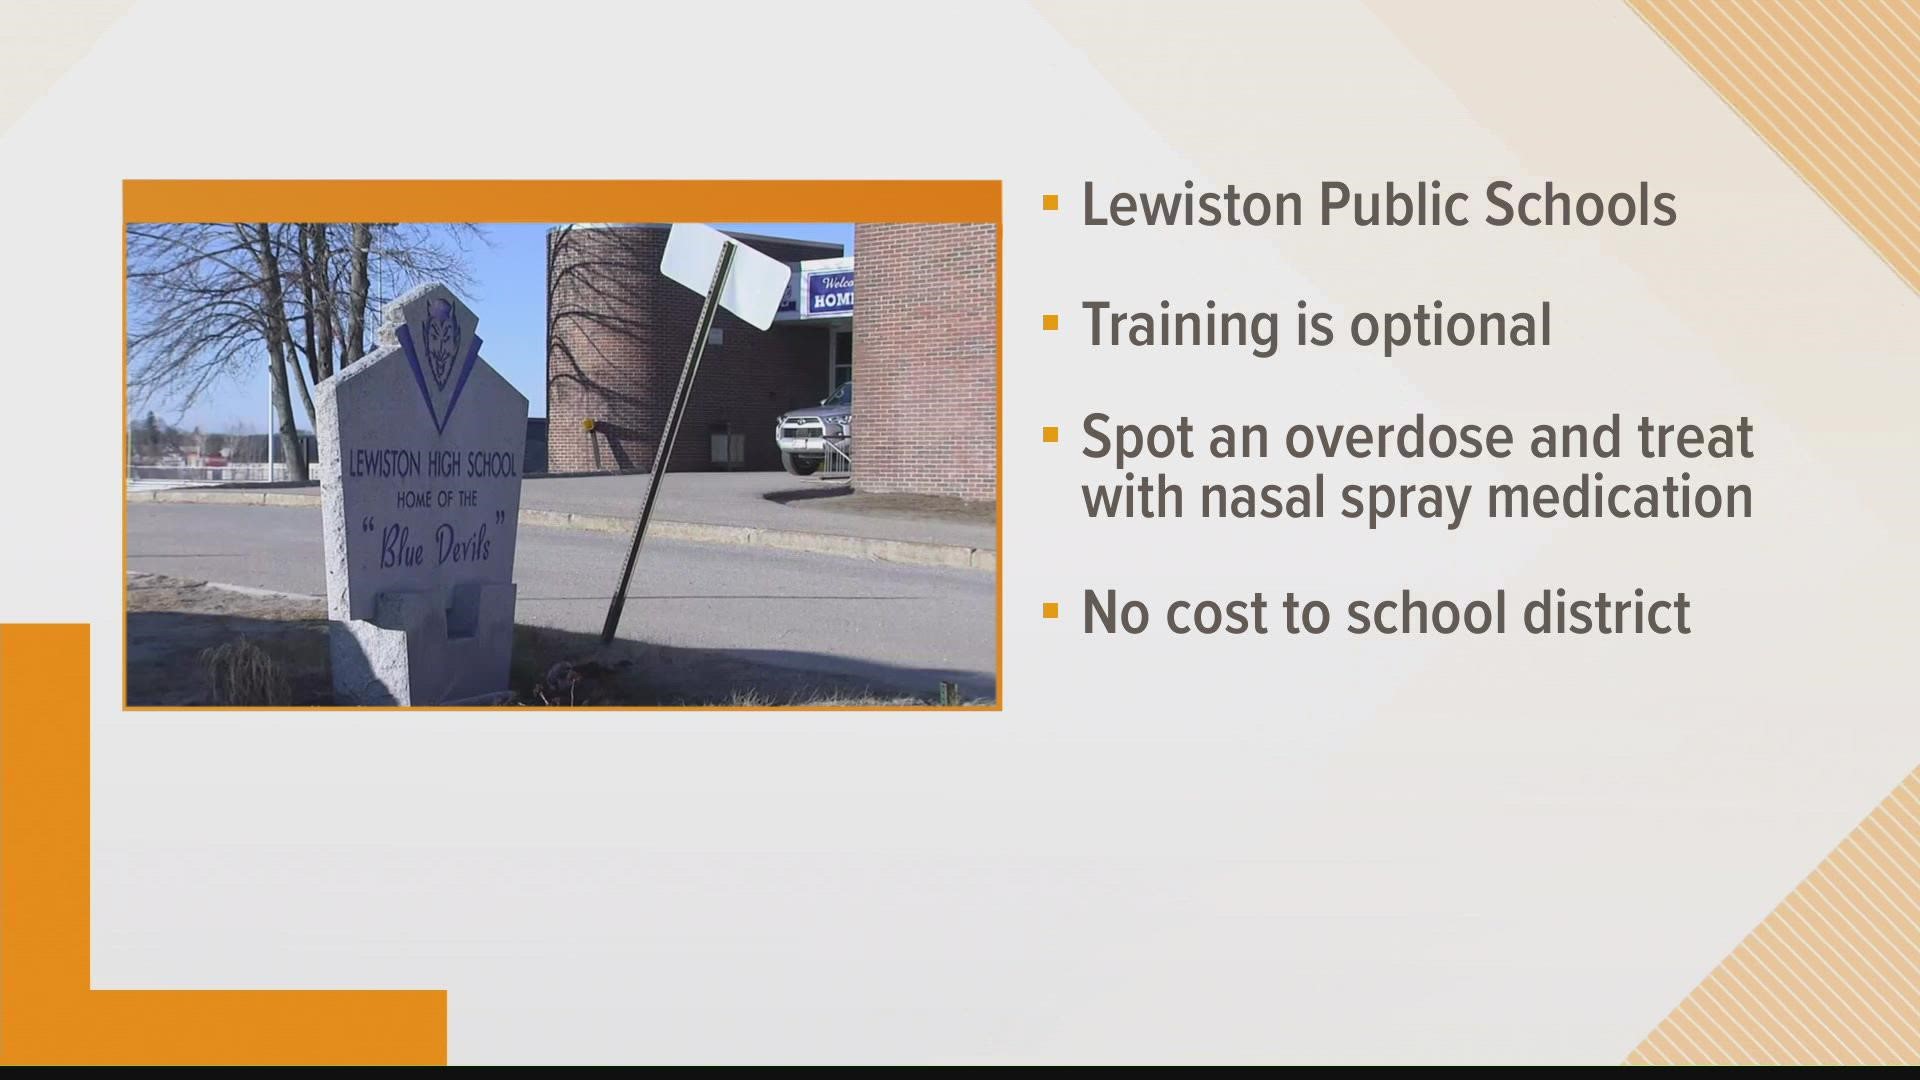 Teachers and staff in Lewiston schools will soon be offered training in the use of Narcan.